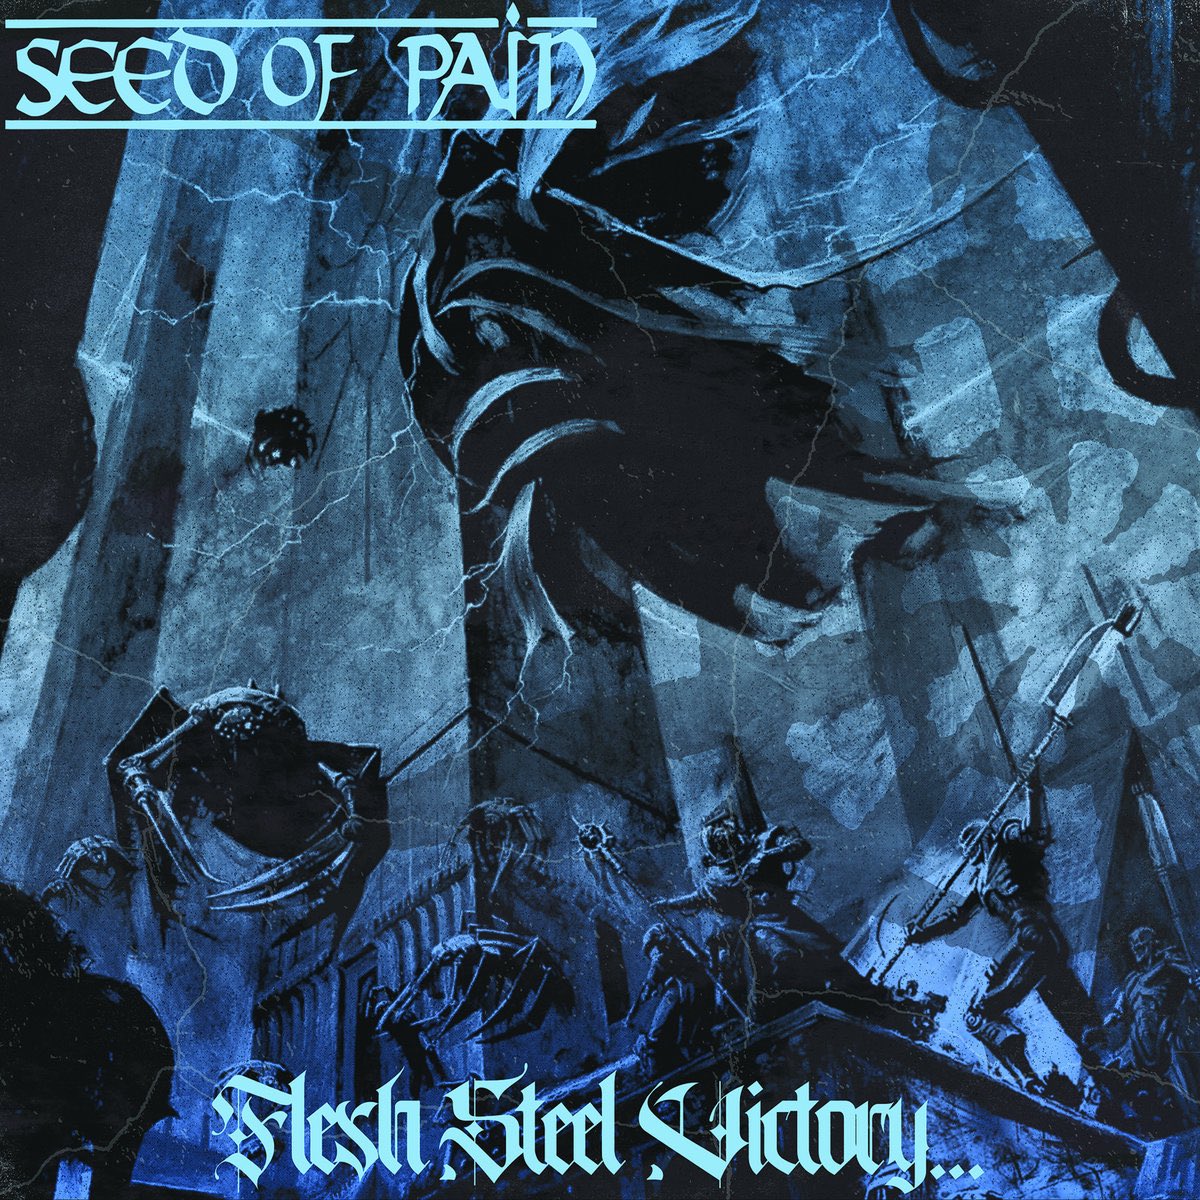 6. Seed of Pain - Flesh, Steel, Victory (the most I have ever connected with a modern hardcore record. This should have had crossover appeal and hype)